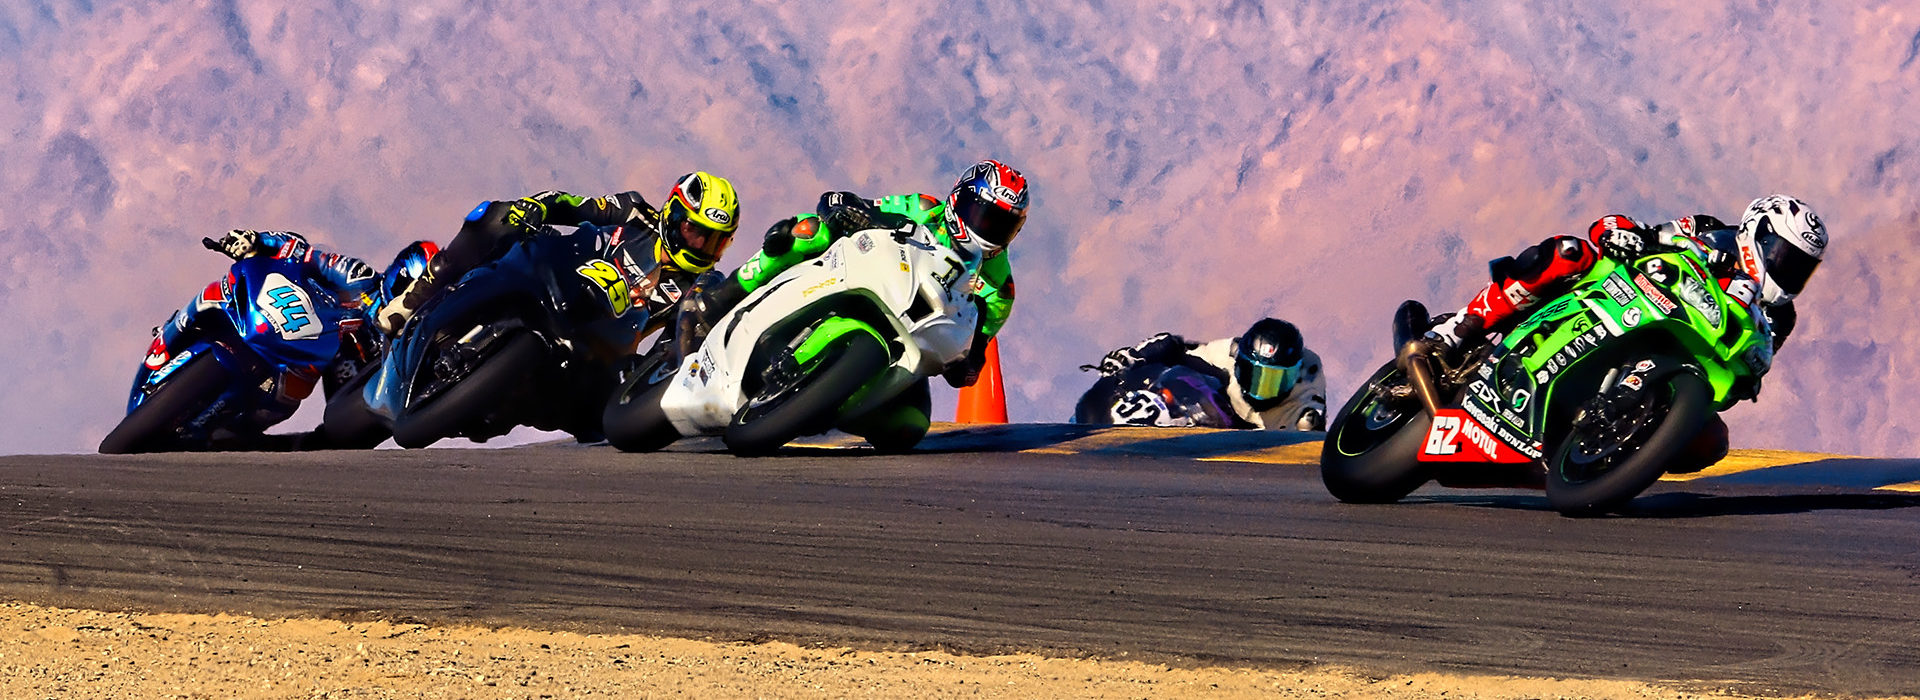 Andy DiBrino (62) leads Michael Gilbert (1), David Anthony (25), and Sam Lochoff (44) during the CVMA Open Shootout race at Chuckwalla Valley Raceway. Photo by CaliPhotography, courtesy CVMA.